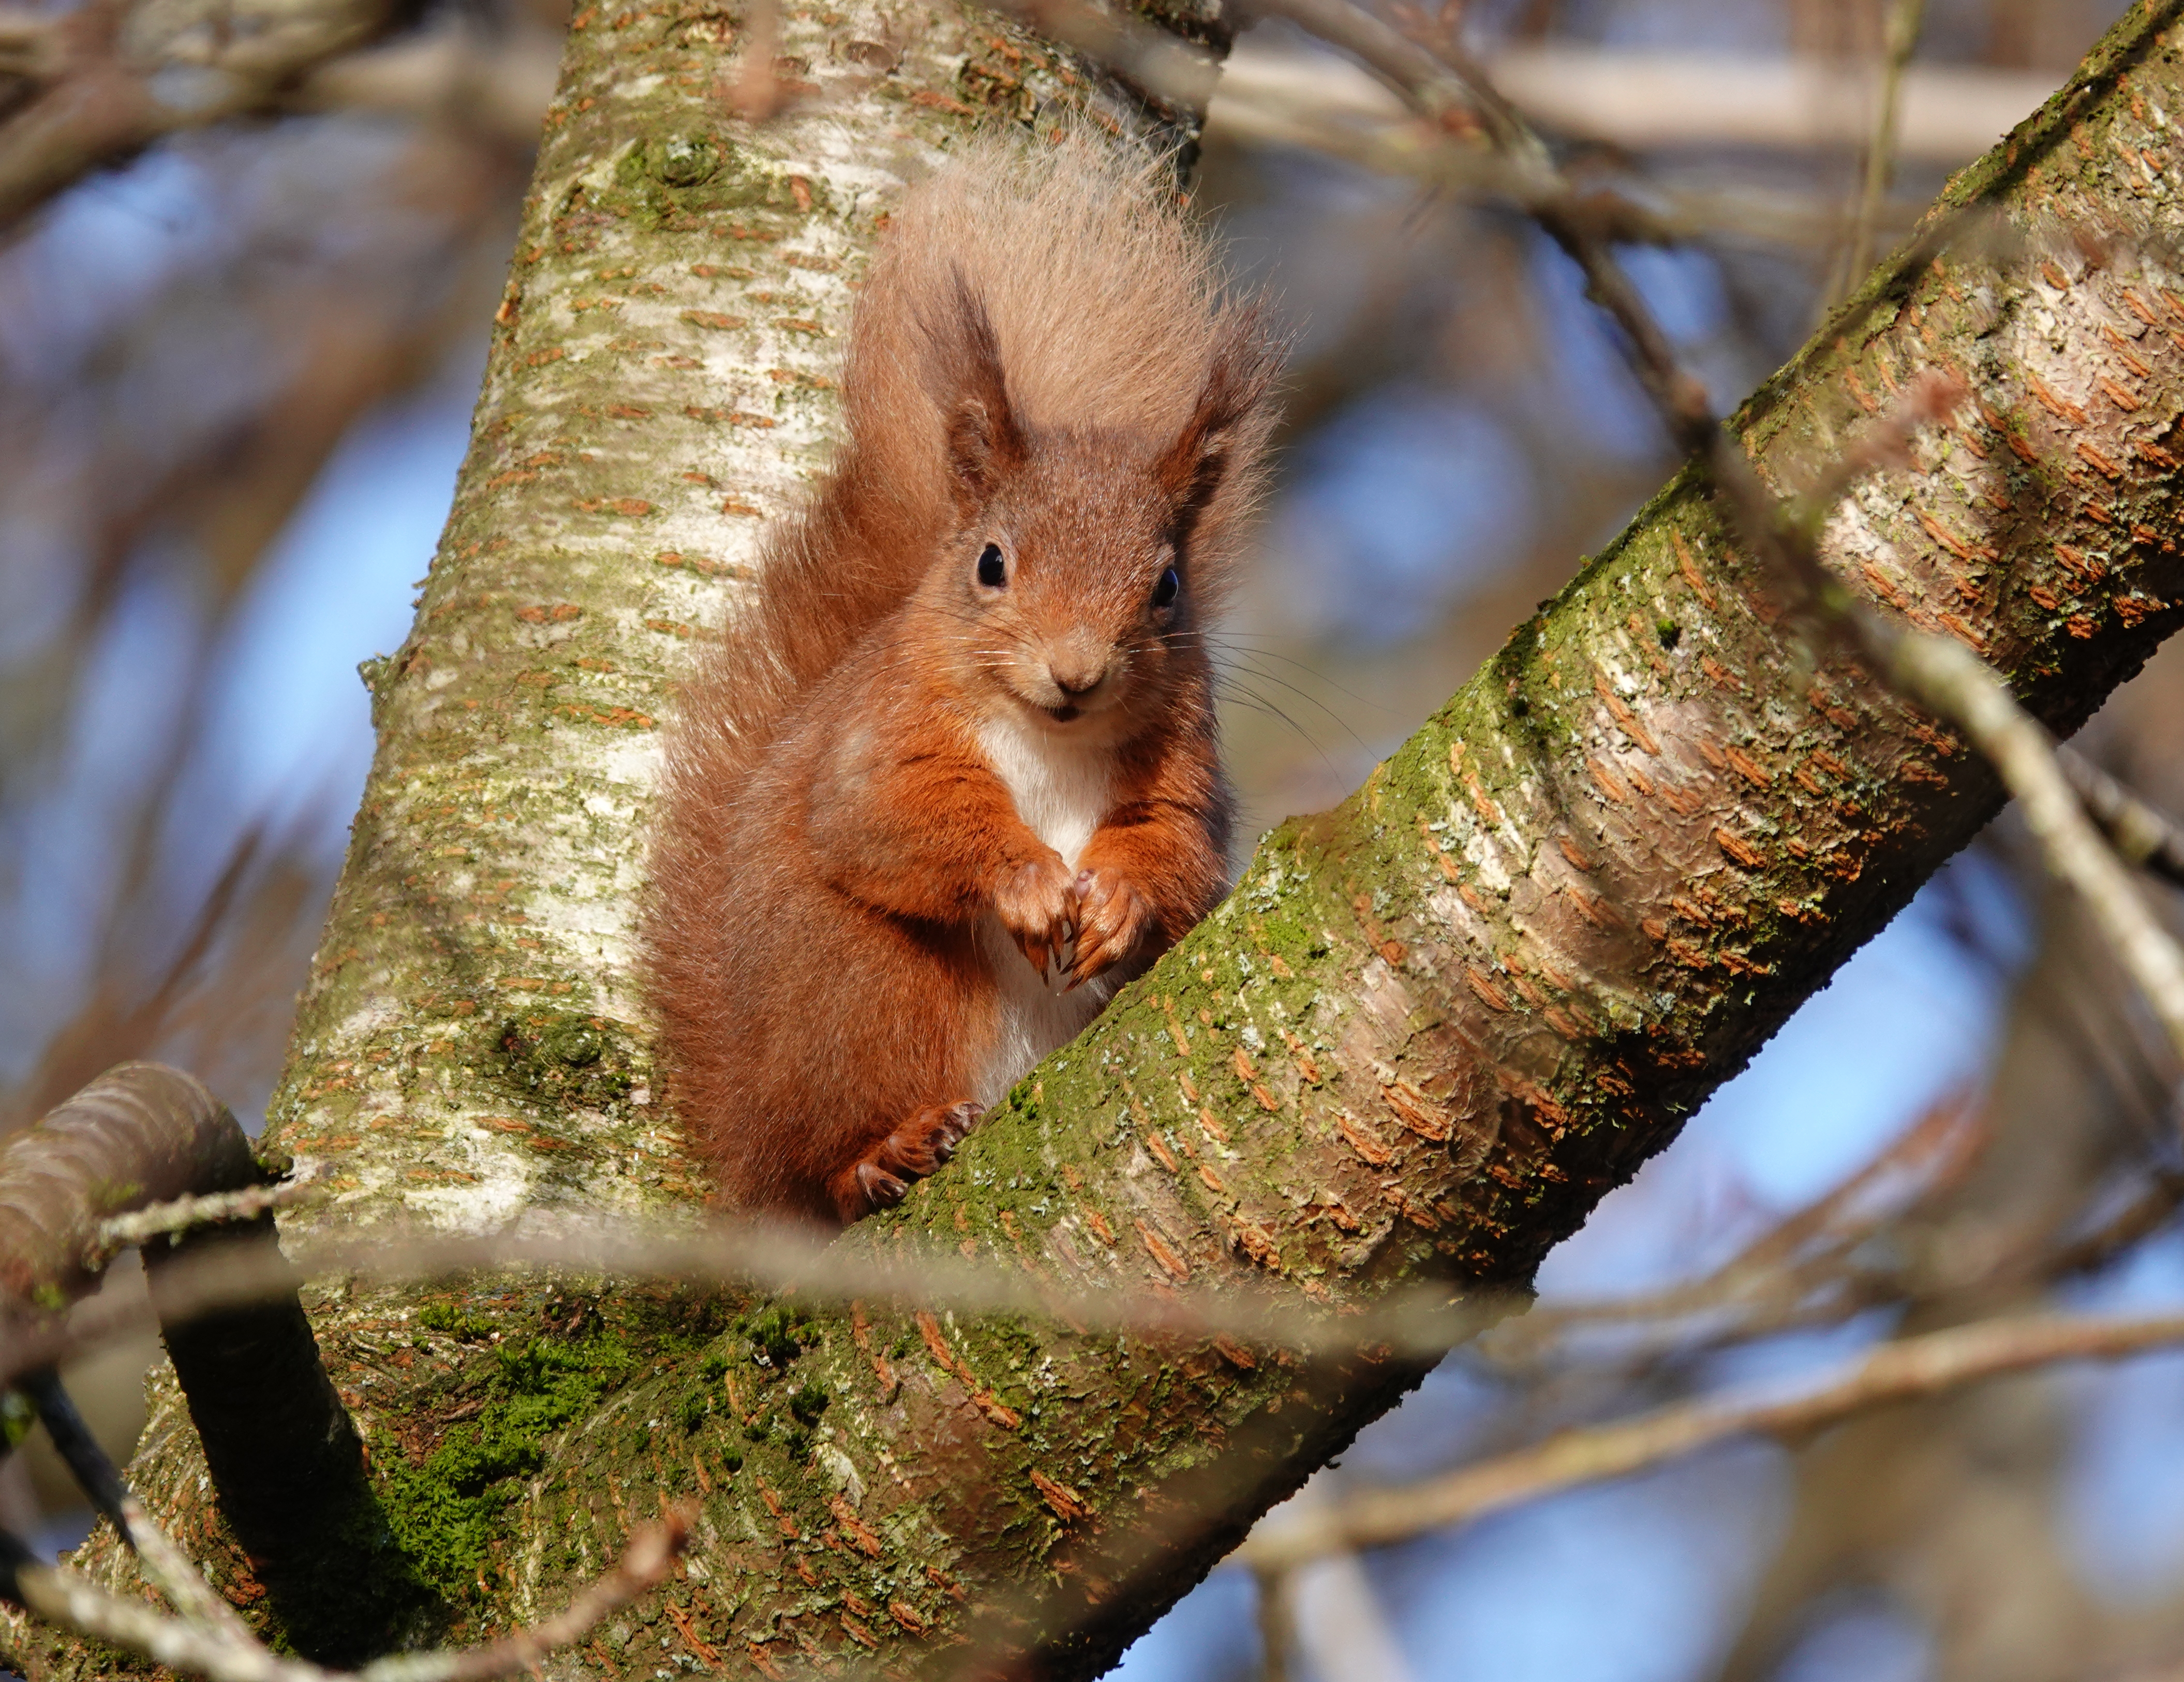 A red squirrel is sitting between the branches of a tree.